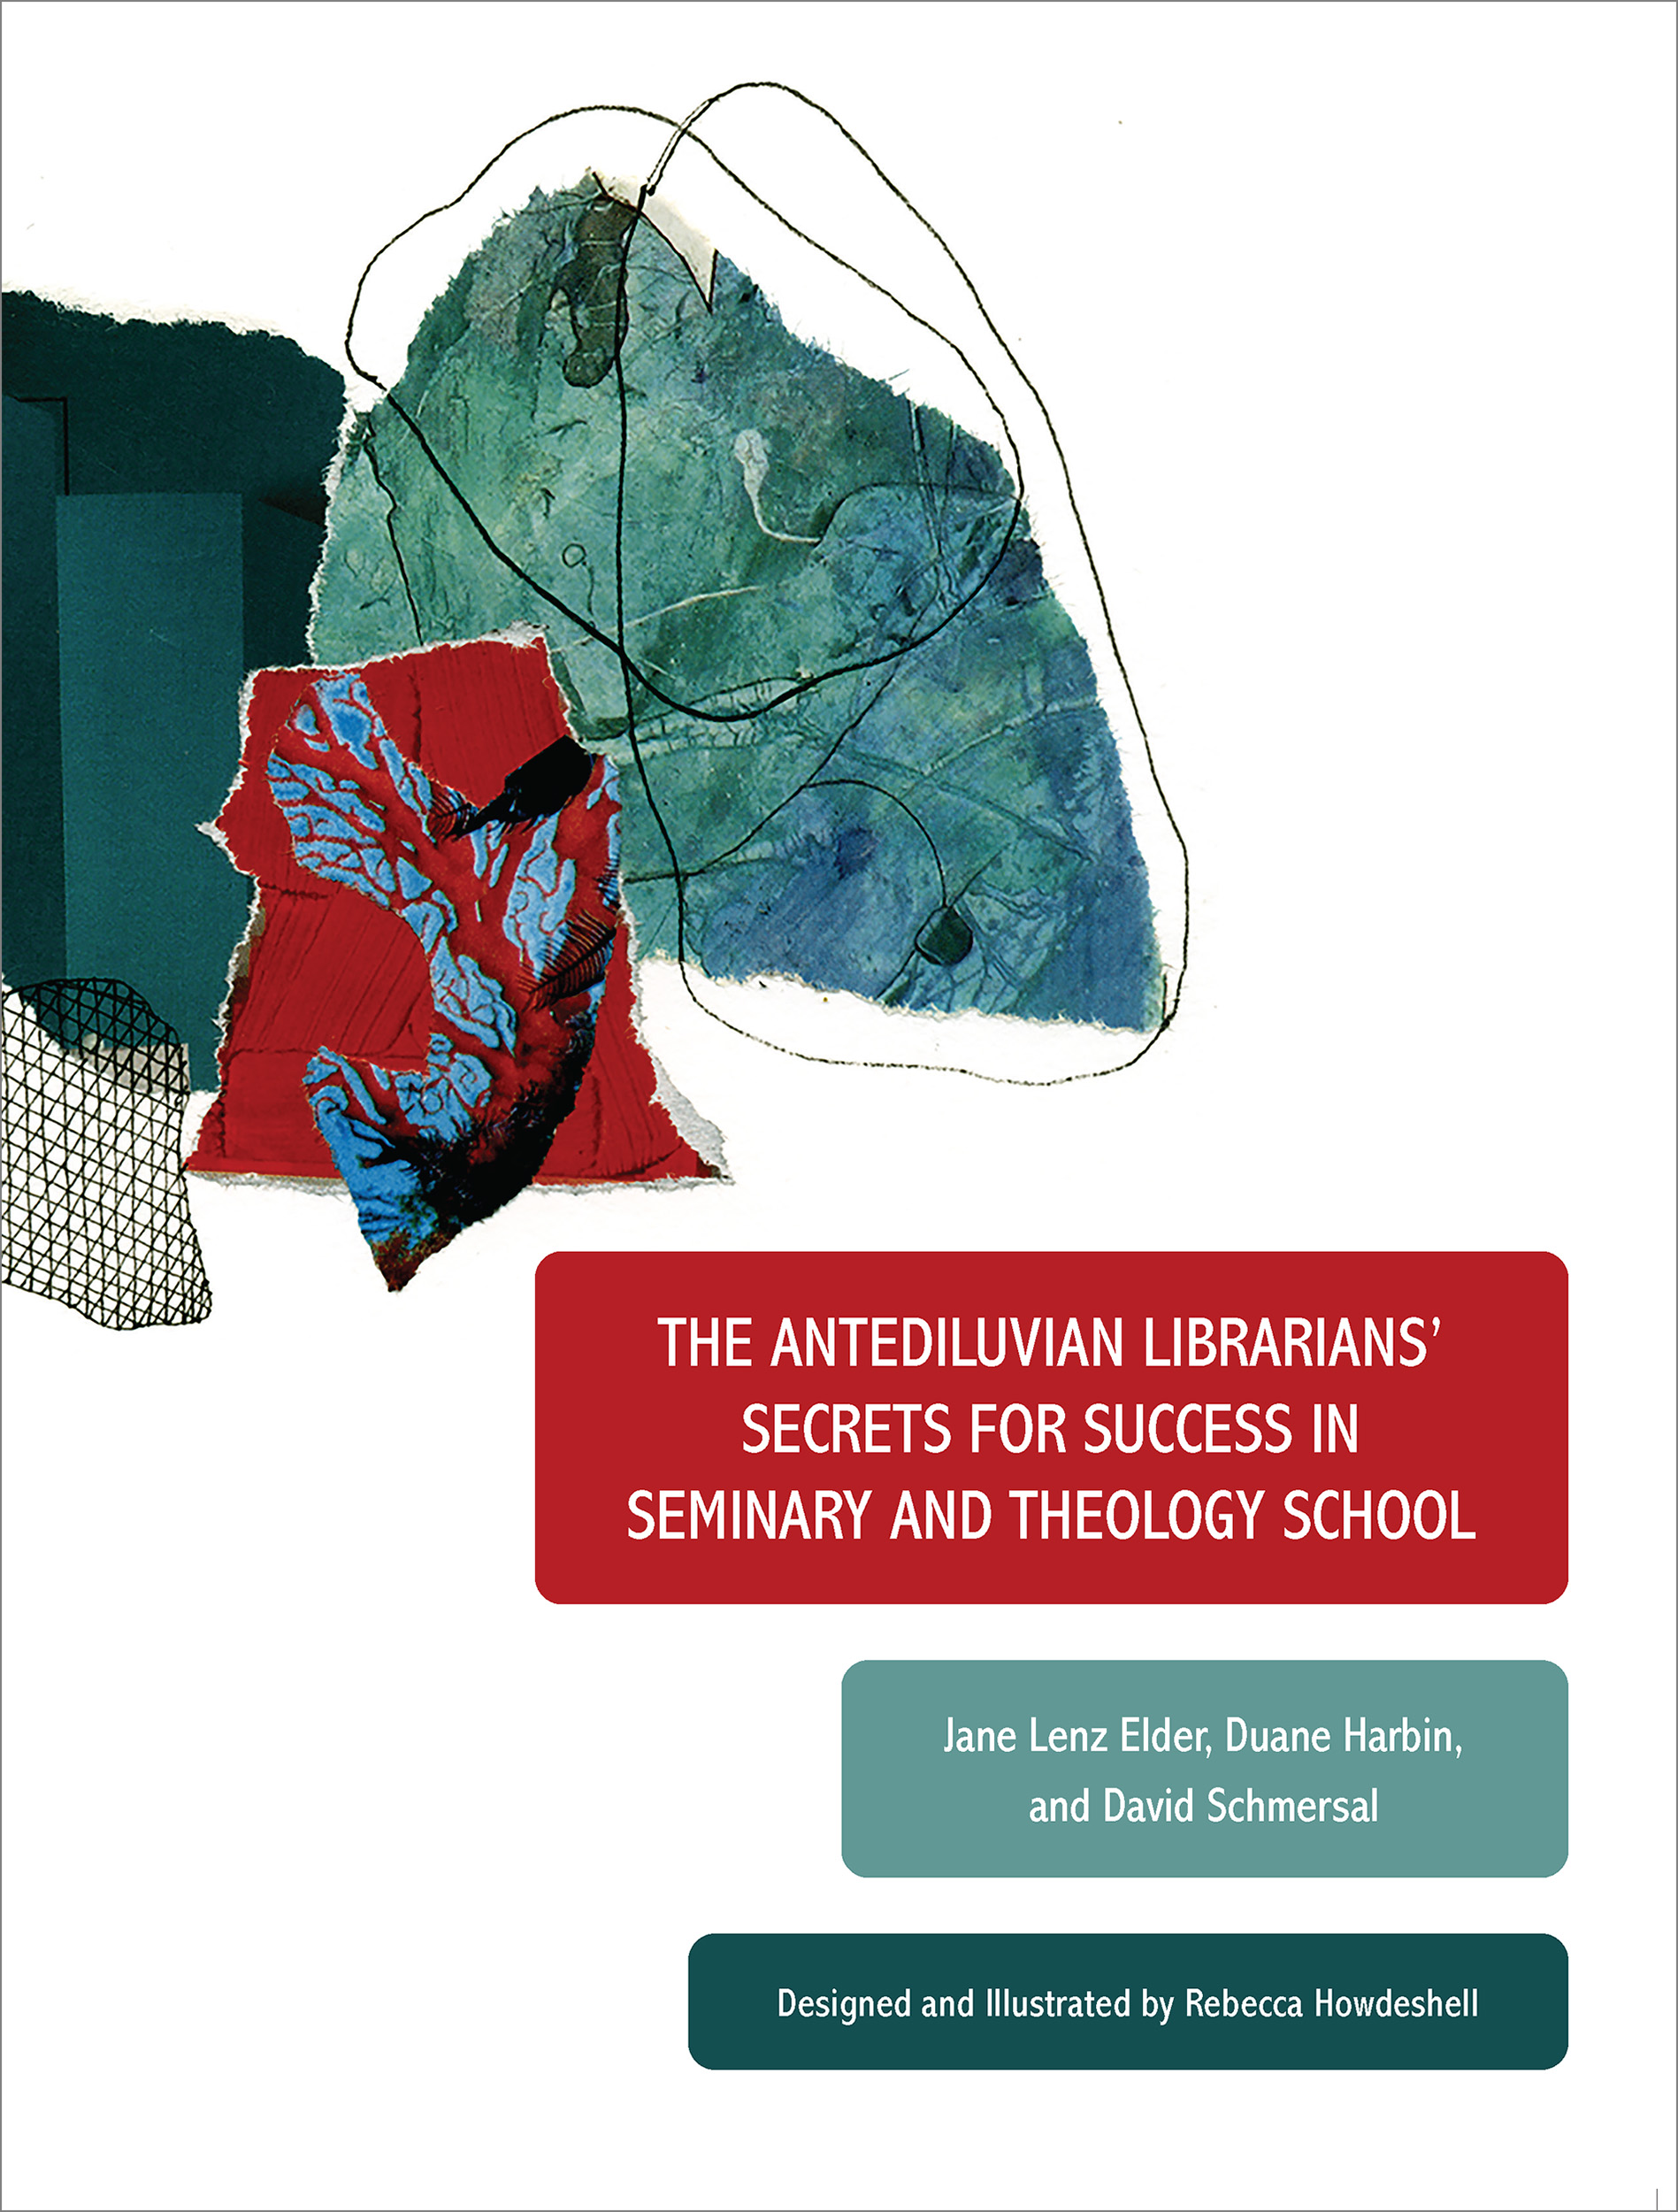 The Antediluvian Librarians' Secrets for Success in Seminary